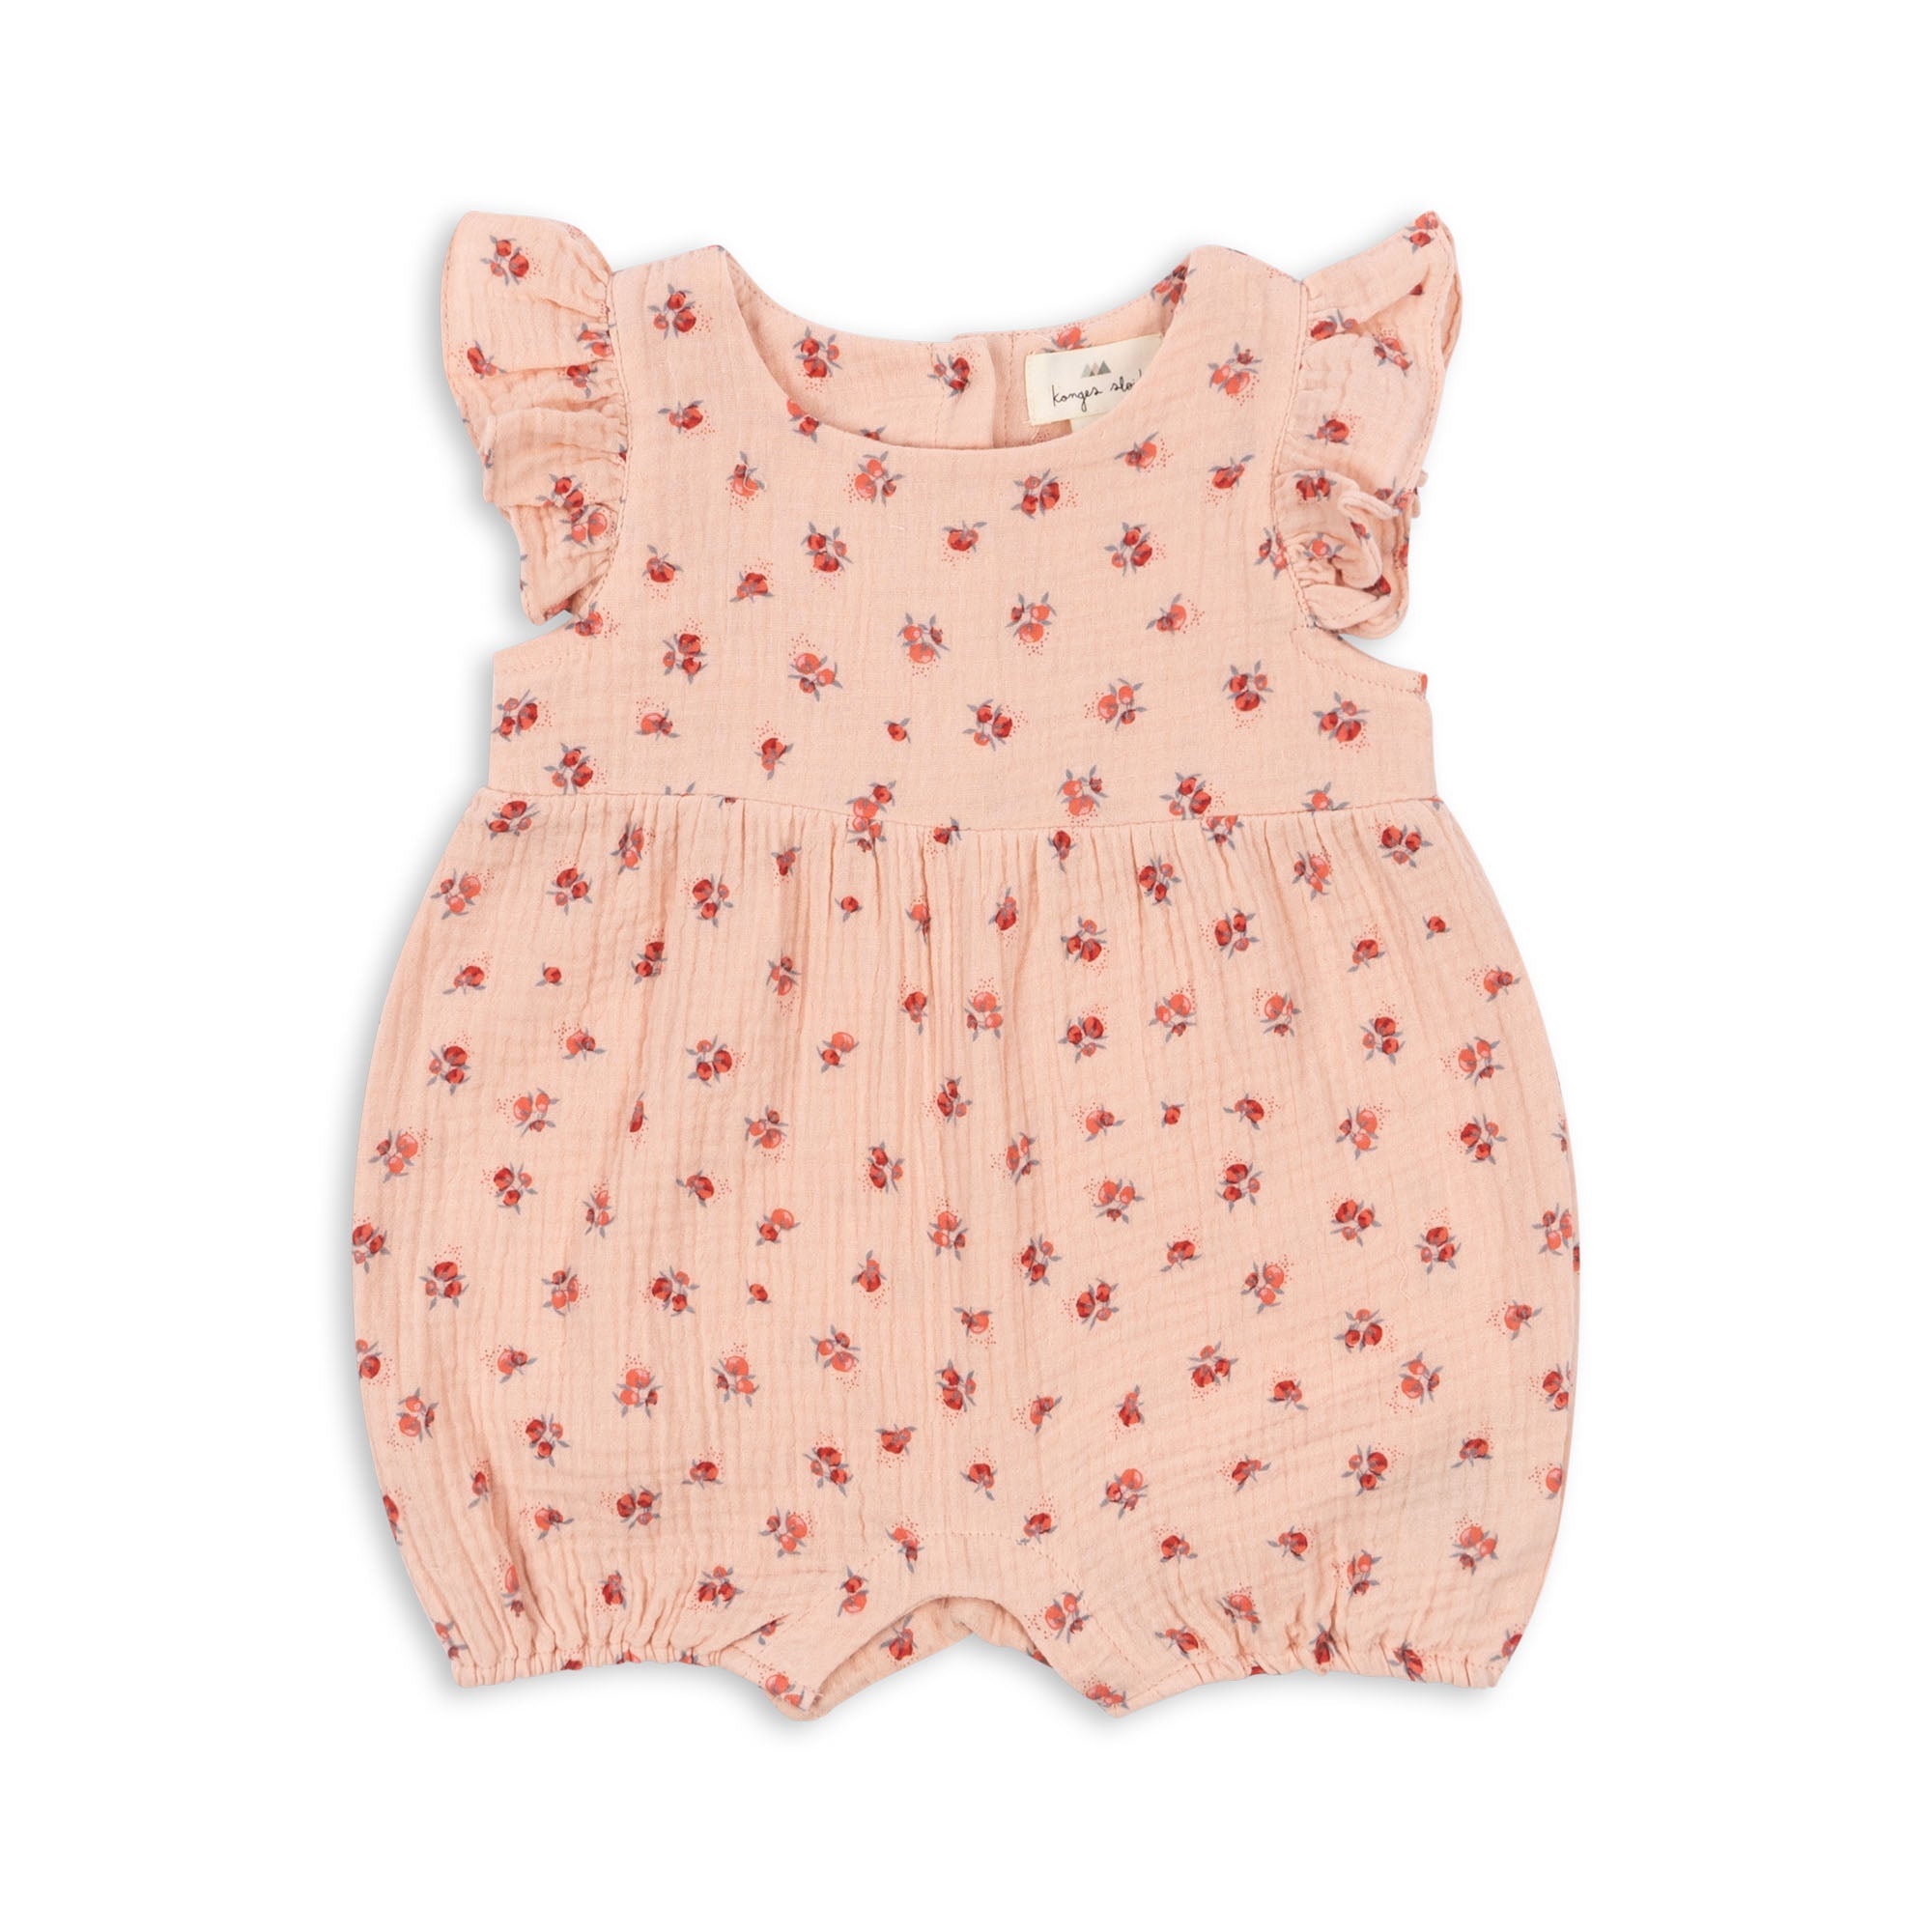 COCO_FRILL_ROMPER-Rompers_and_jumpsuits_-_Woven-KS100201-PEONIA_PINK.jpg